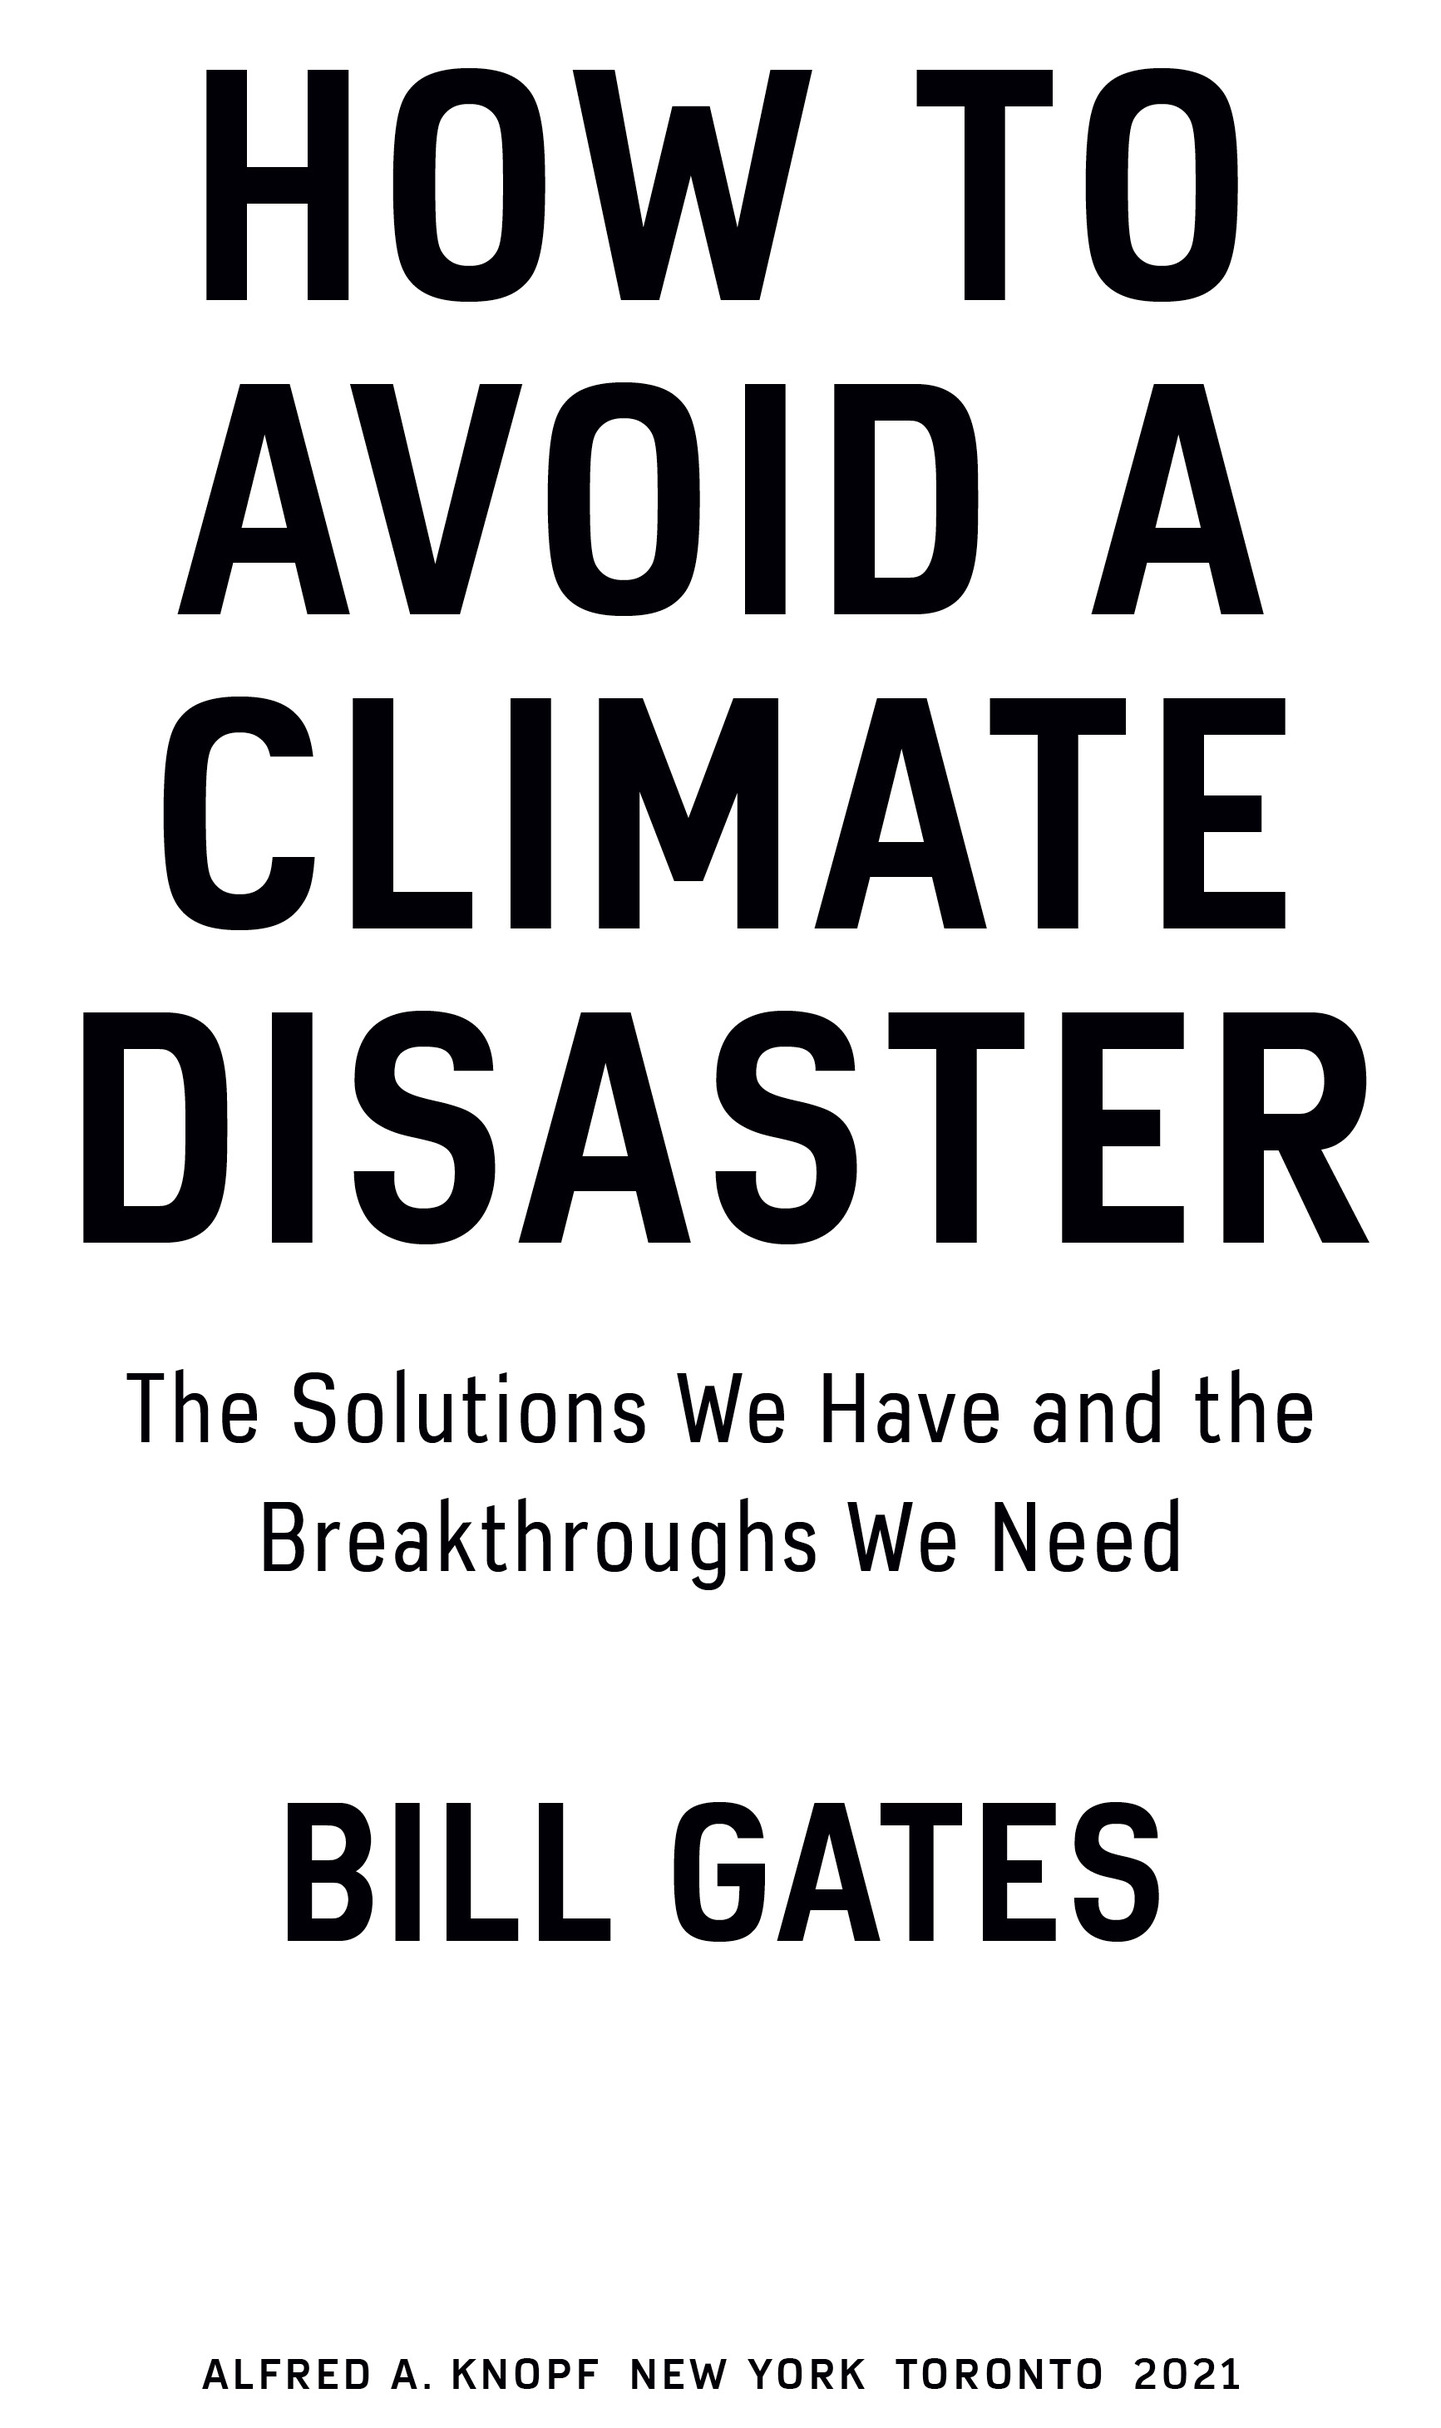 Book Title, How to Avoid a Climate Disaster, Subtitle, The Solutions We Have and the Breakthroughs We Need, Author, Bill Gates, Imprint, Alfred A. Knopf New York Toronto 2021